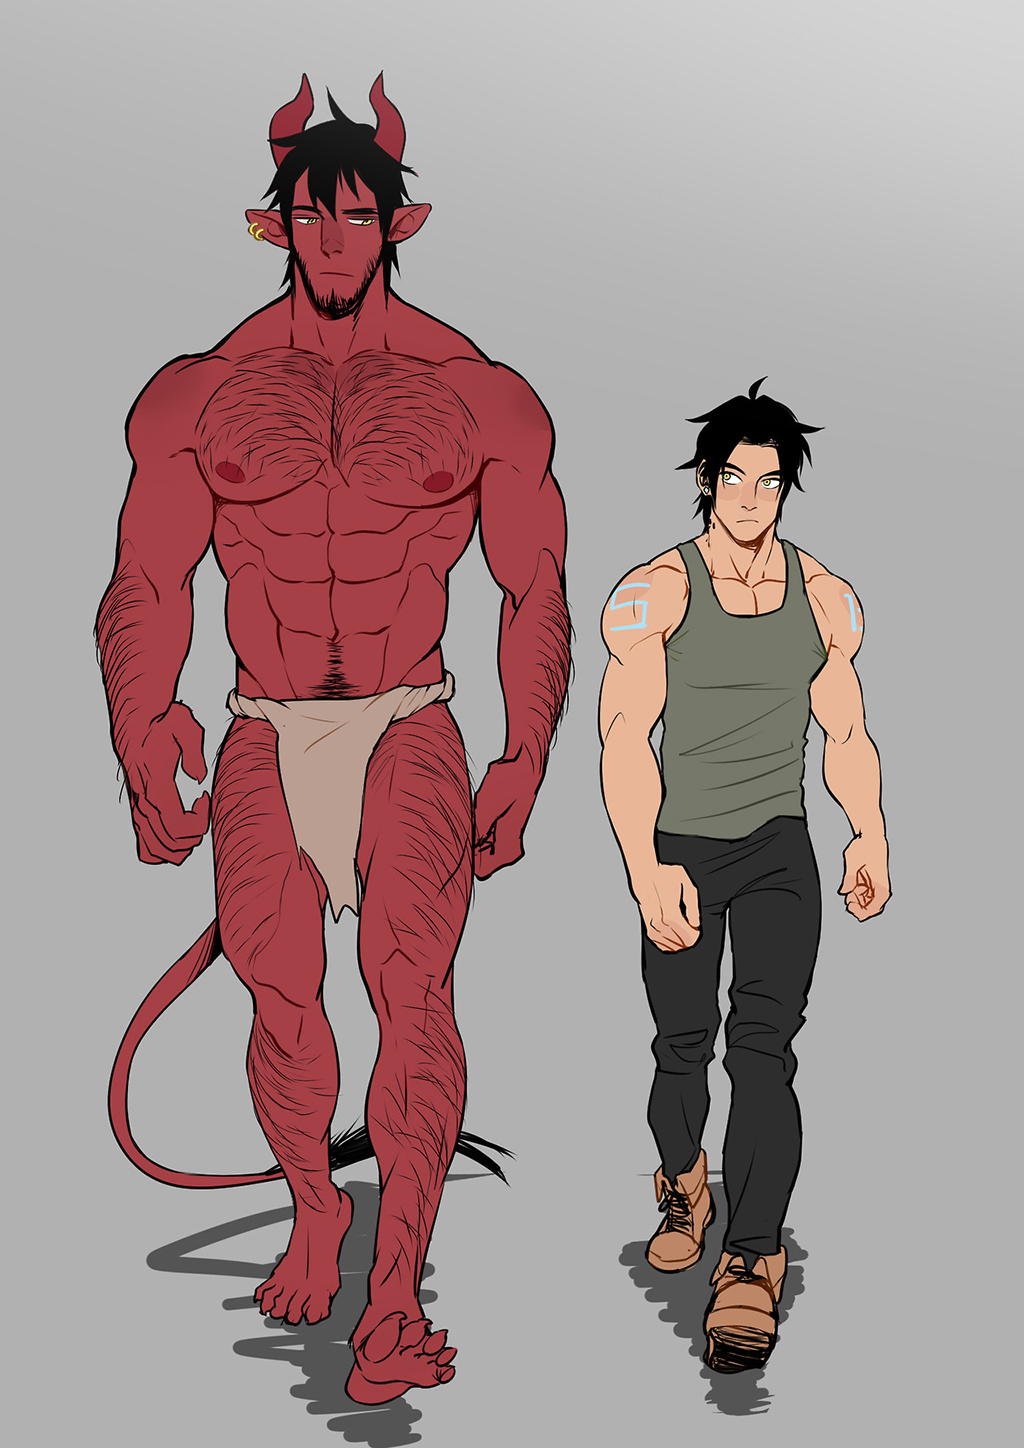 The Devil and S-13 #1: The Devil and S-13. 